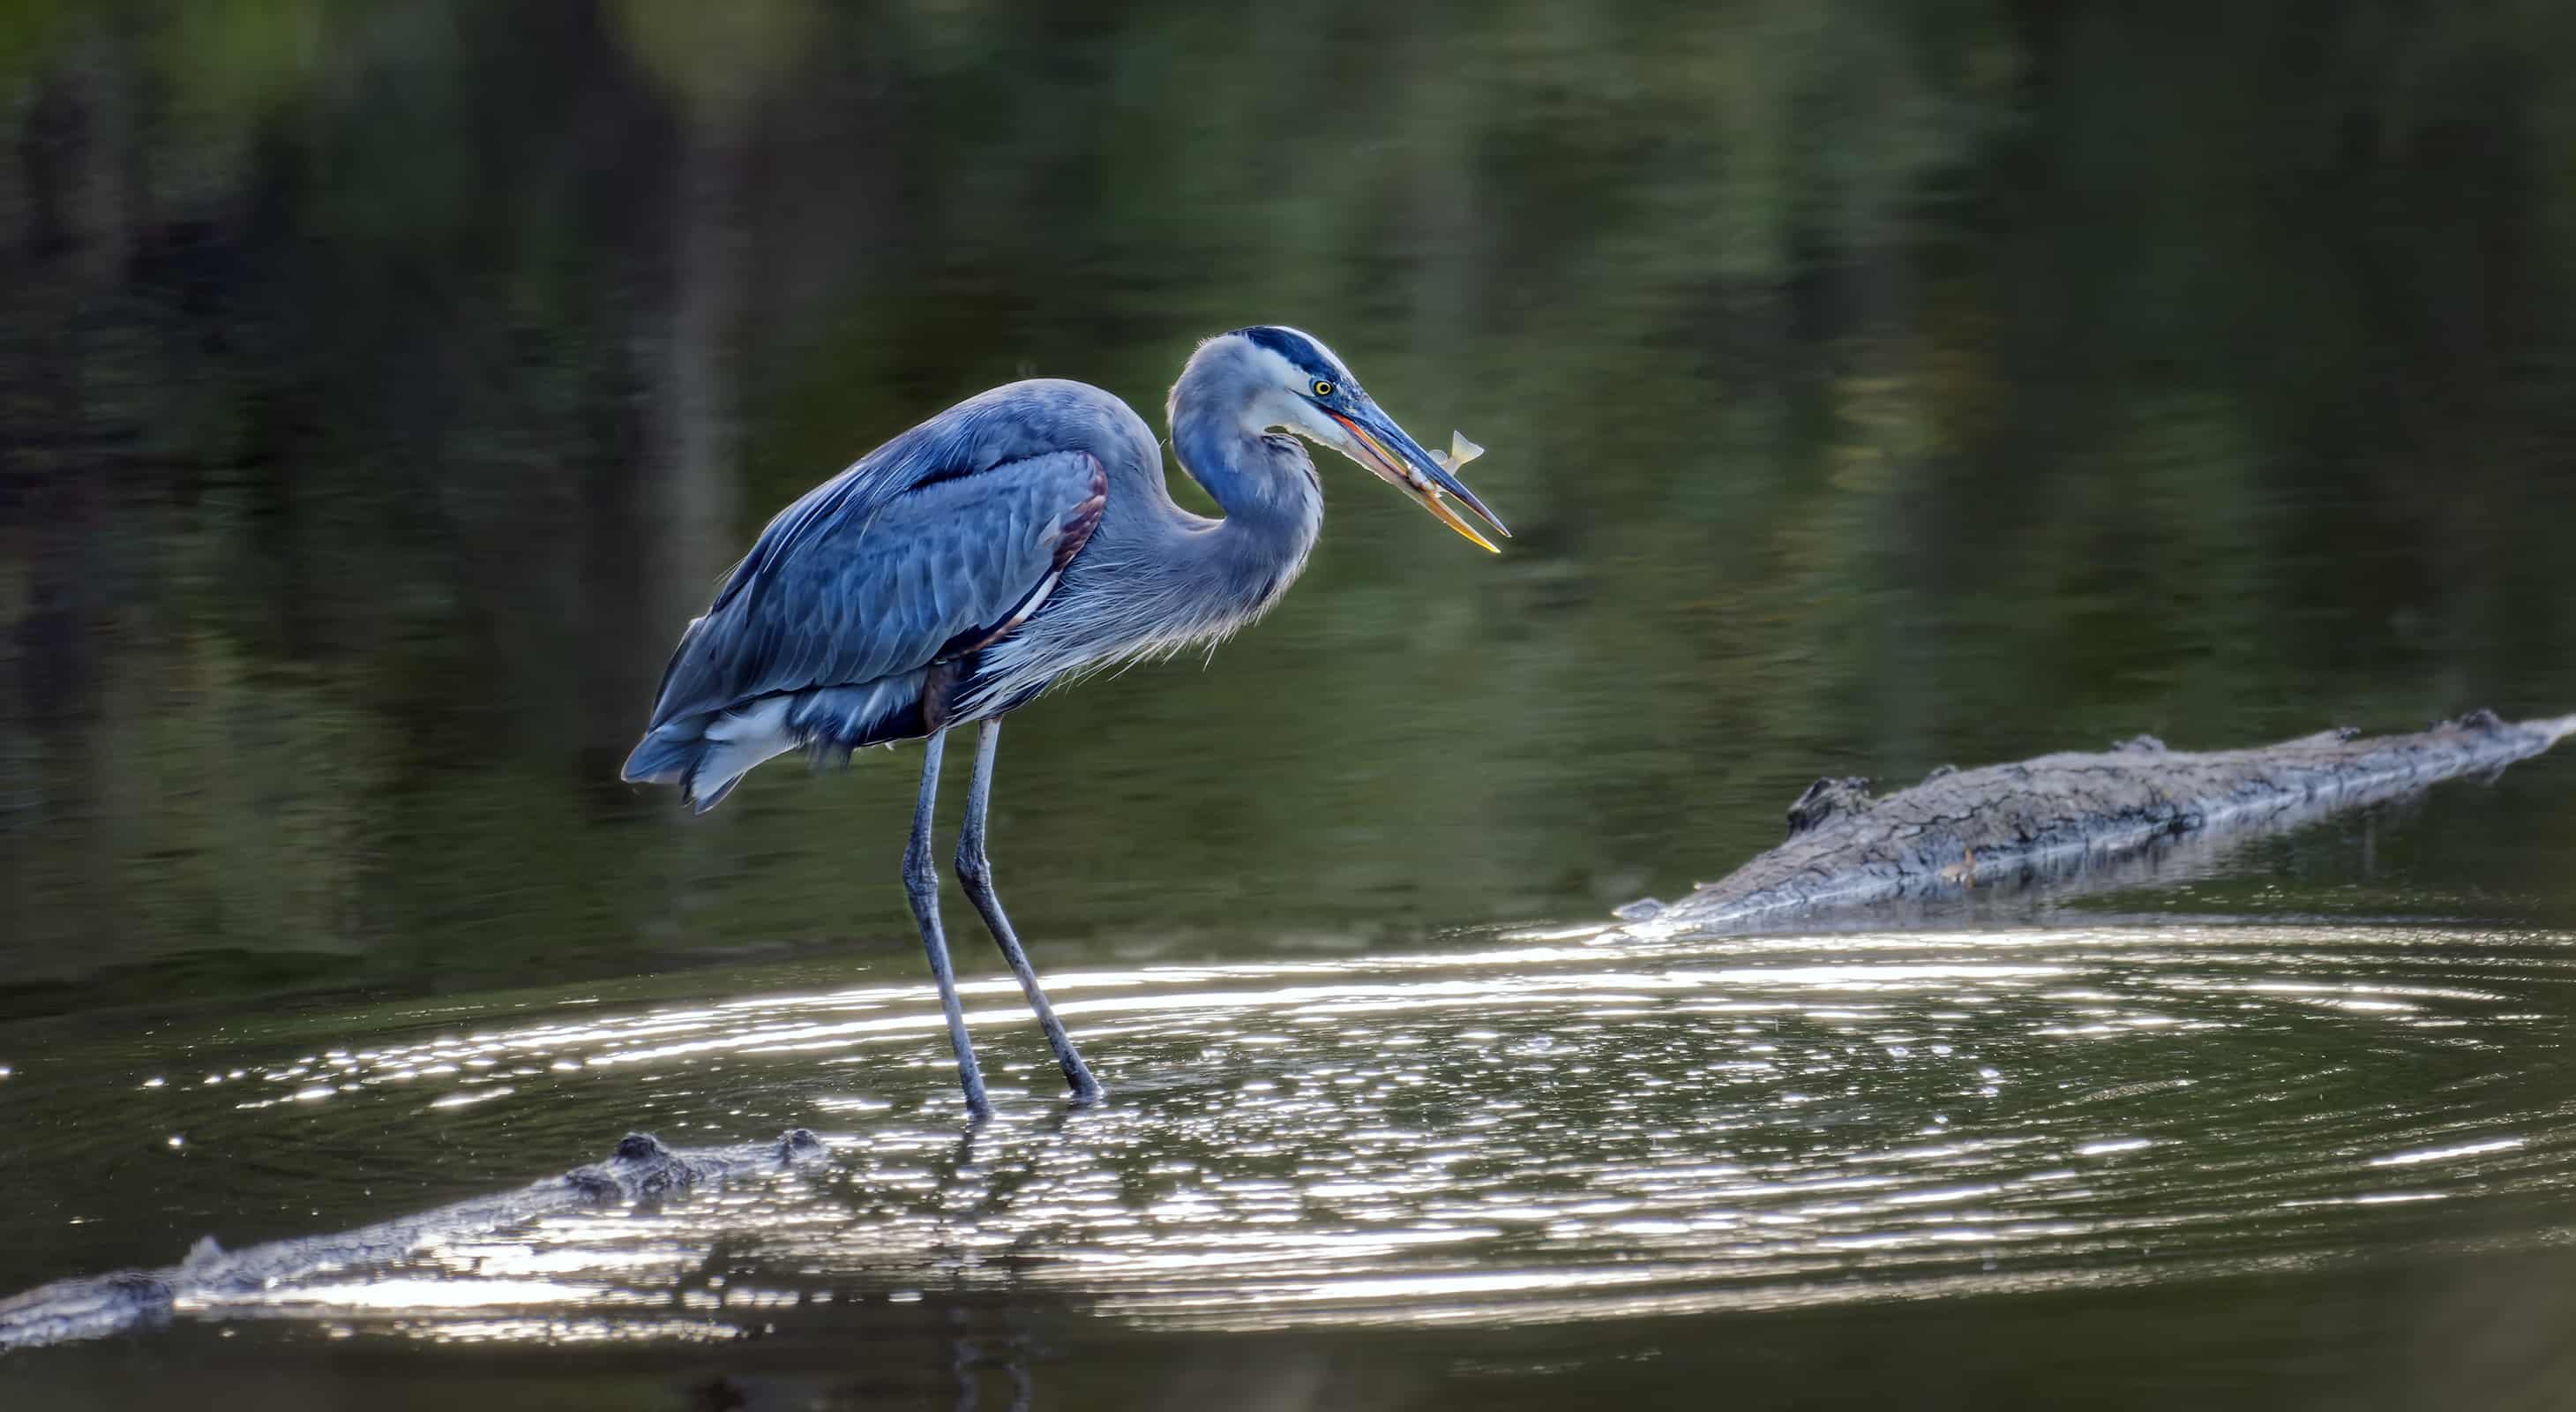 Catch a glimpse of a Blue Heron while bird watching near Chesapeake Bay